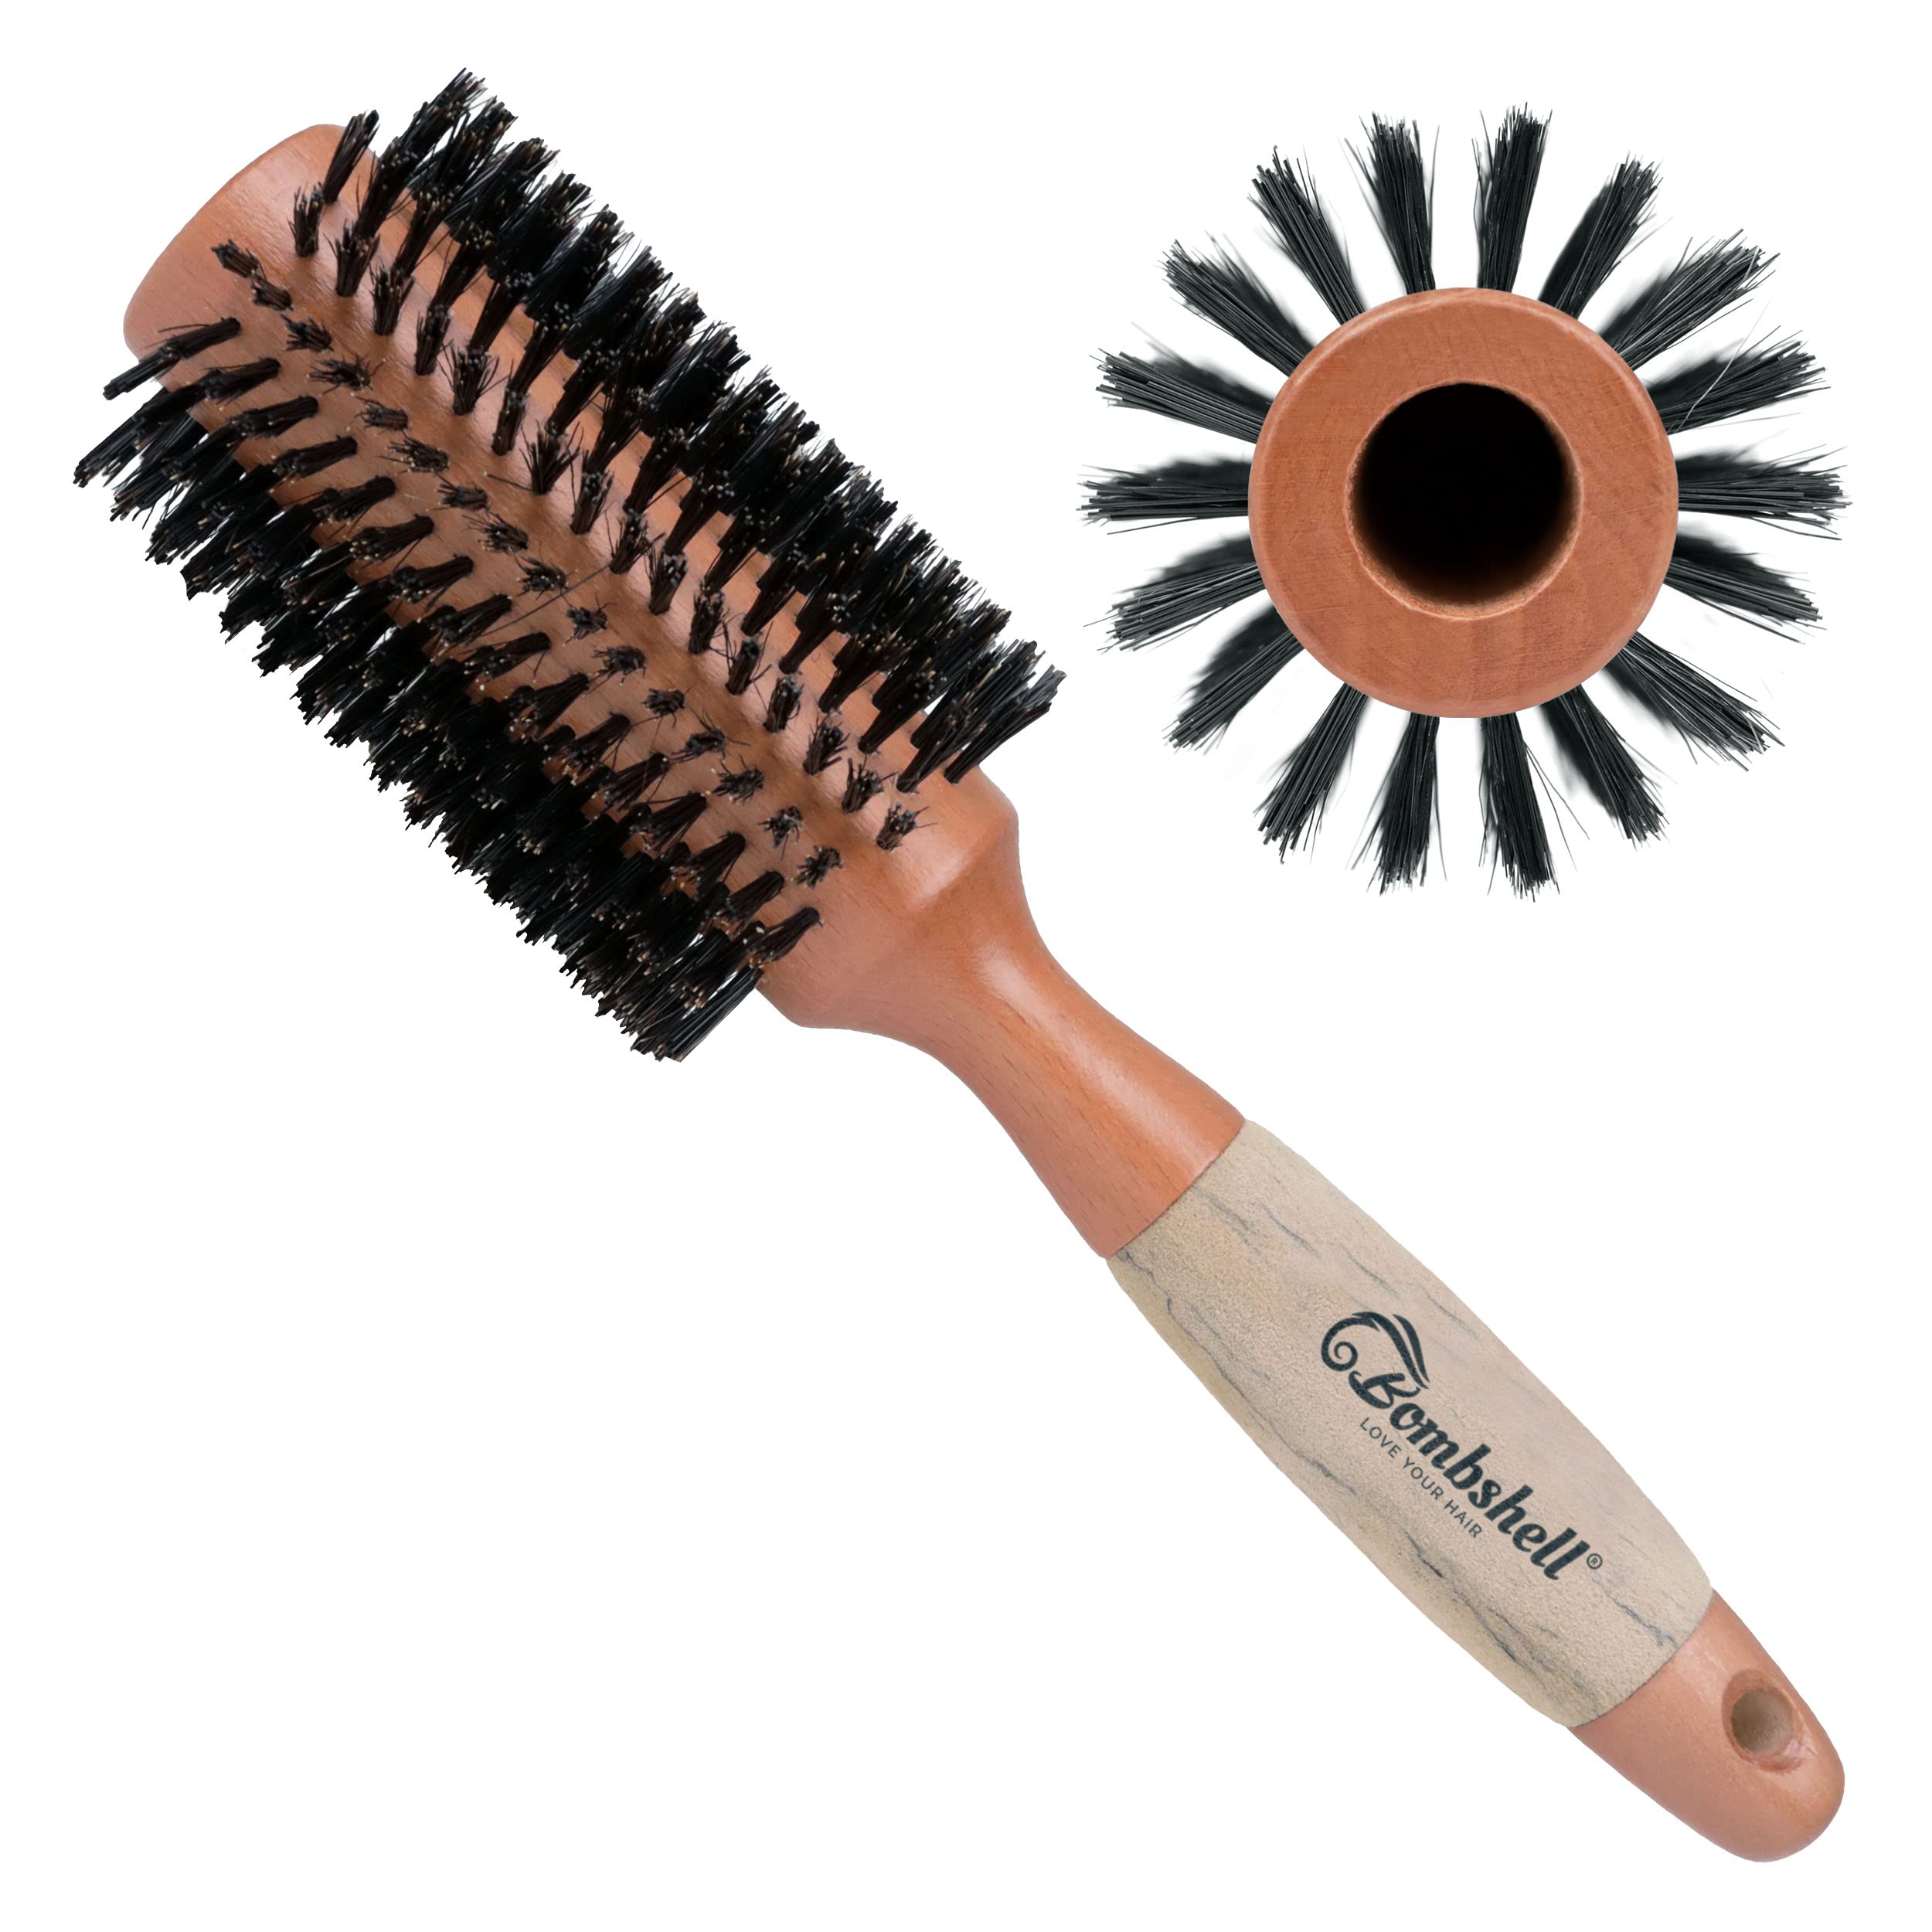 Bombshell Birch Wood Round Brush — Sustainable Boar Bristle Round Brush  with Natural Birch Wood Handle, Round Hair Brush for Styling, Blow Out, and  Curling (2.5 inch)